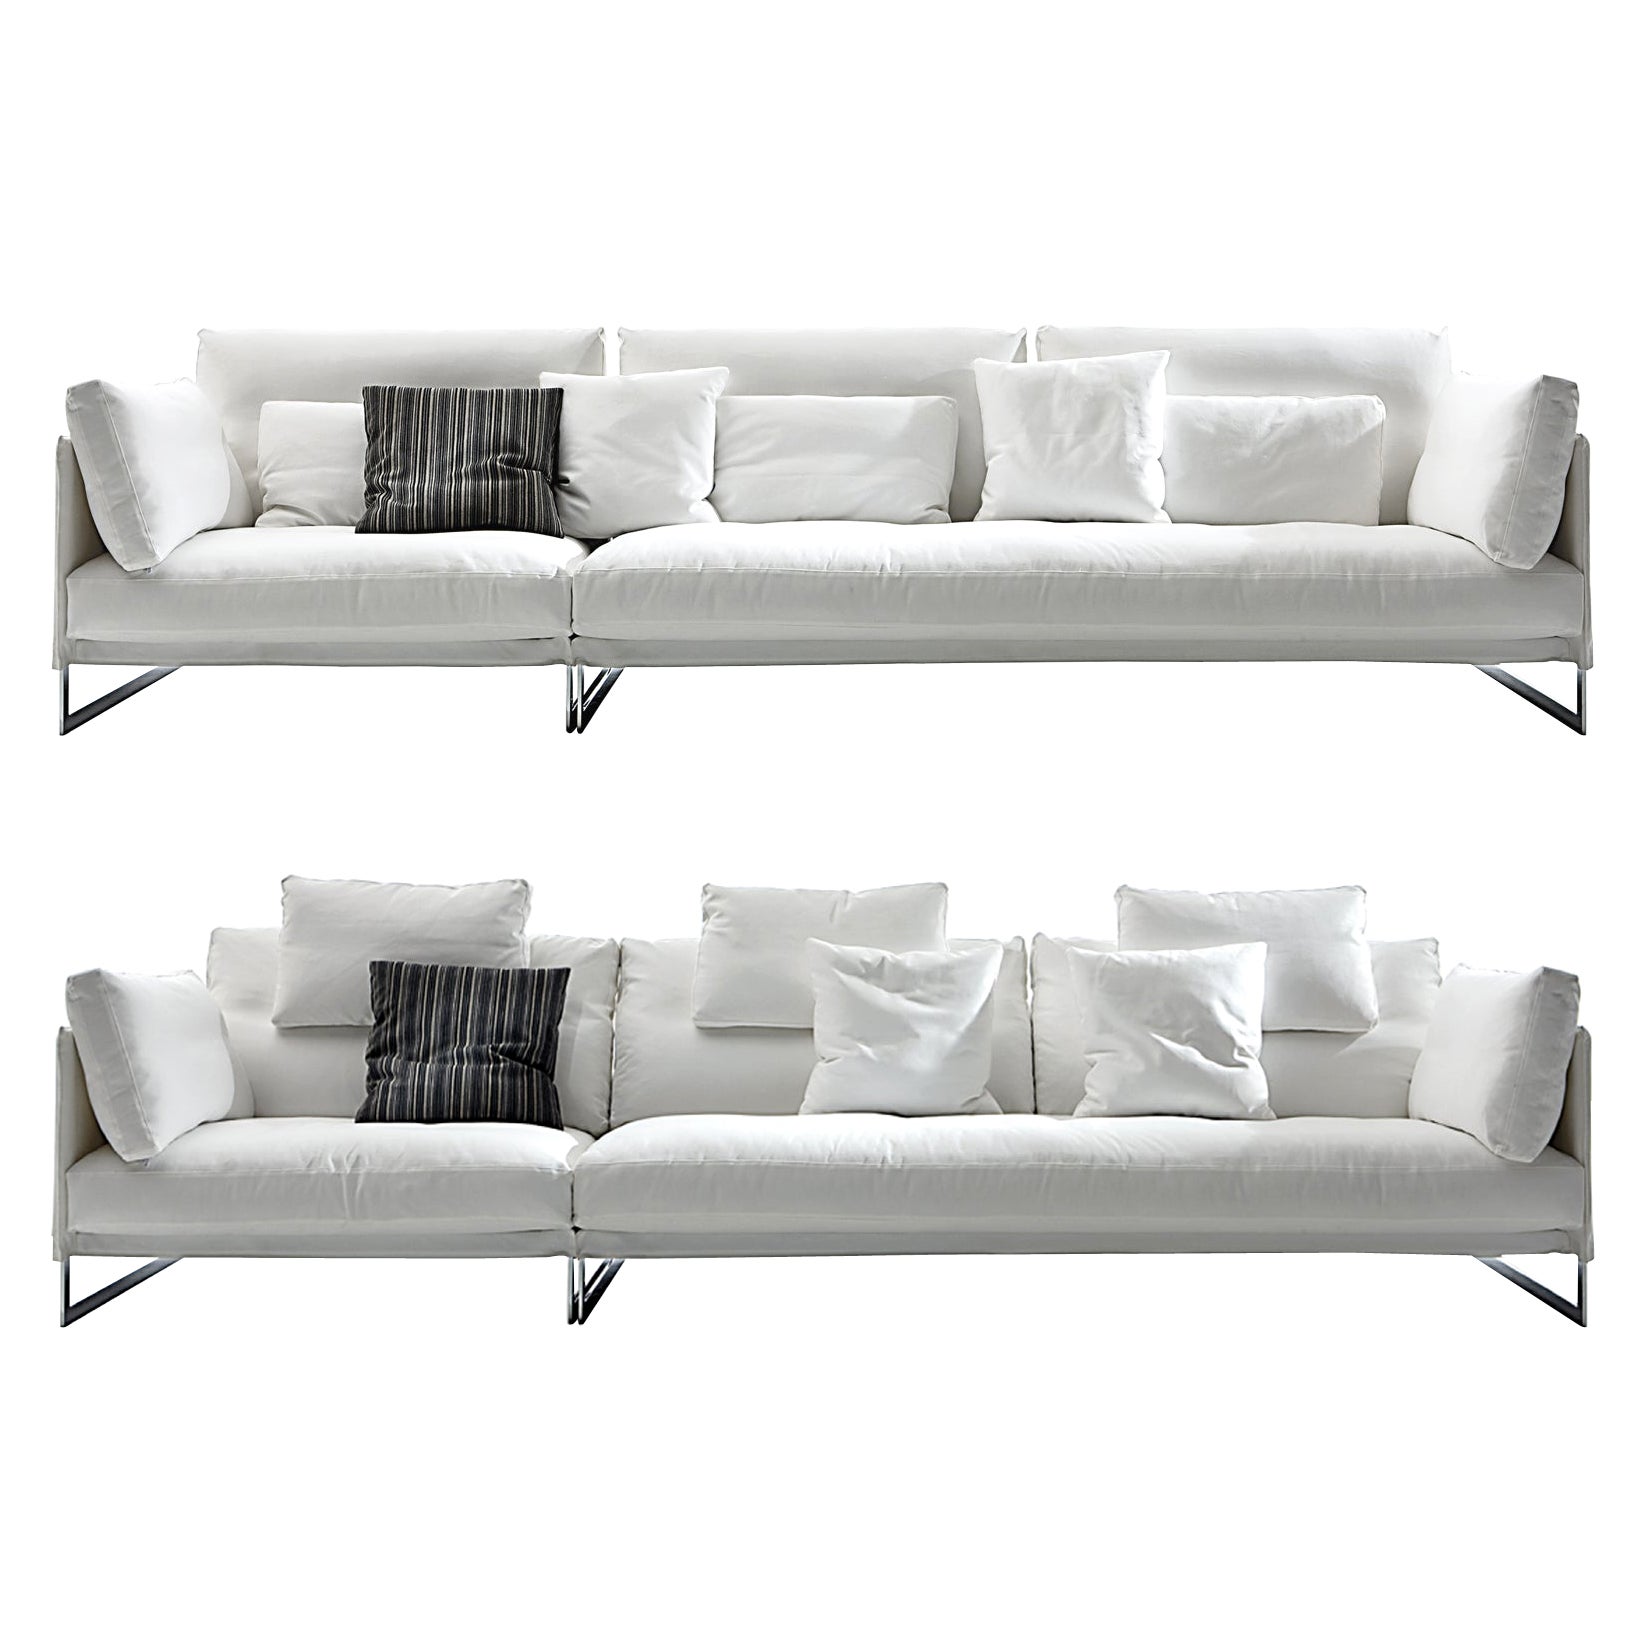 Livingston Small Sofa in Lusso White Upholstery with Chrome by Giuseppe Viganò For Sale